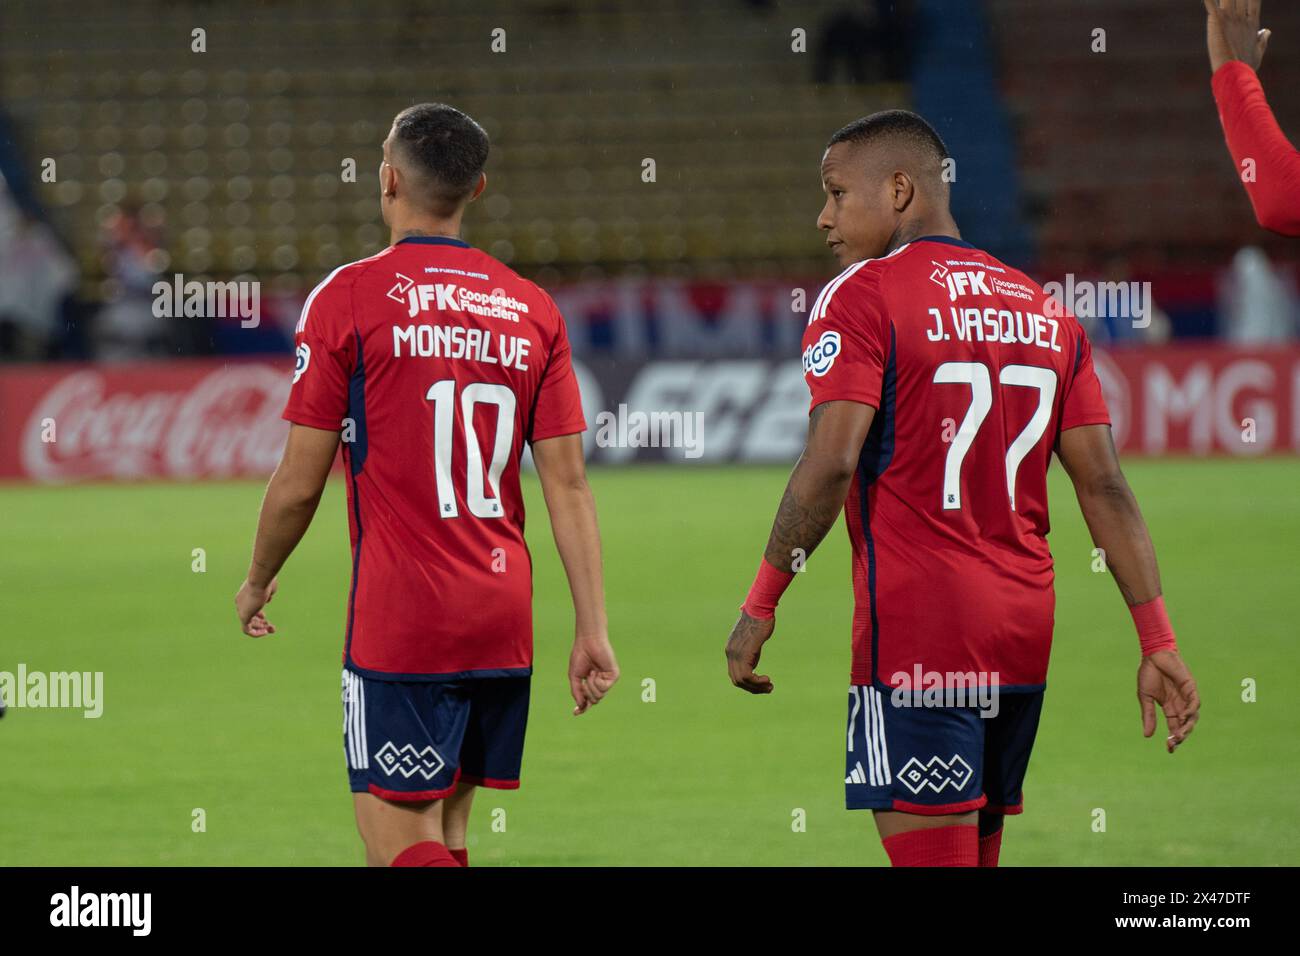 Medellin, Colombia. 25th Apr, 2024. Deportivo Independiente Medellin's Miguel Angel Monsalve (L) and Jhon Veasquez (R) during the Conmebol Sudamericana match between Deportivo Independiente Medellin V Defensa y Justicia in Medellin, Colombia, April 25, 2024. Photo by: Camilo Moreno/Long Visual Press Credit: Long Visual Press/Alamy Live News Stock Photo